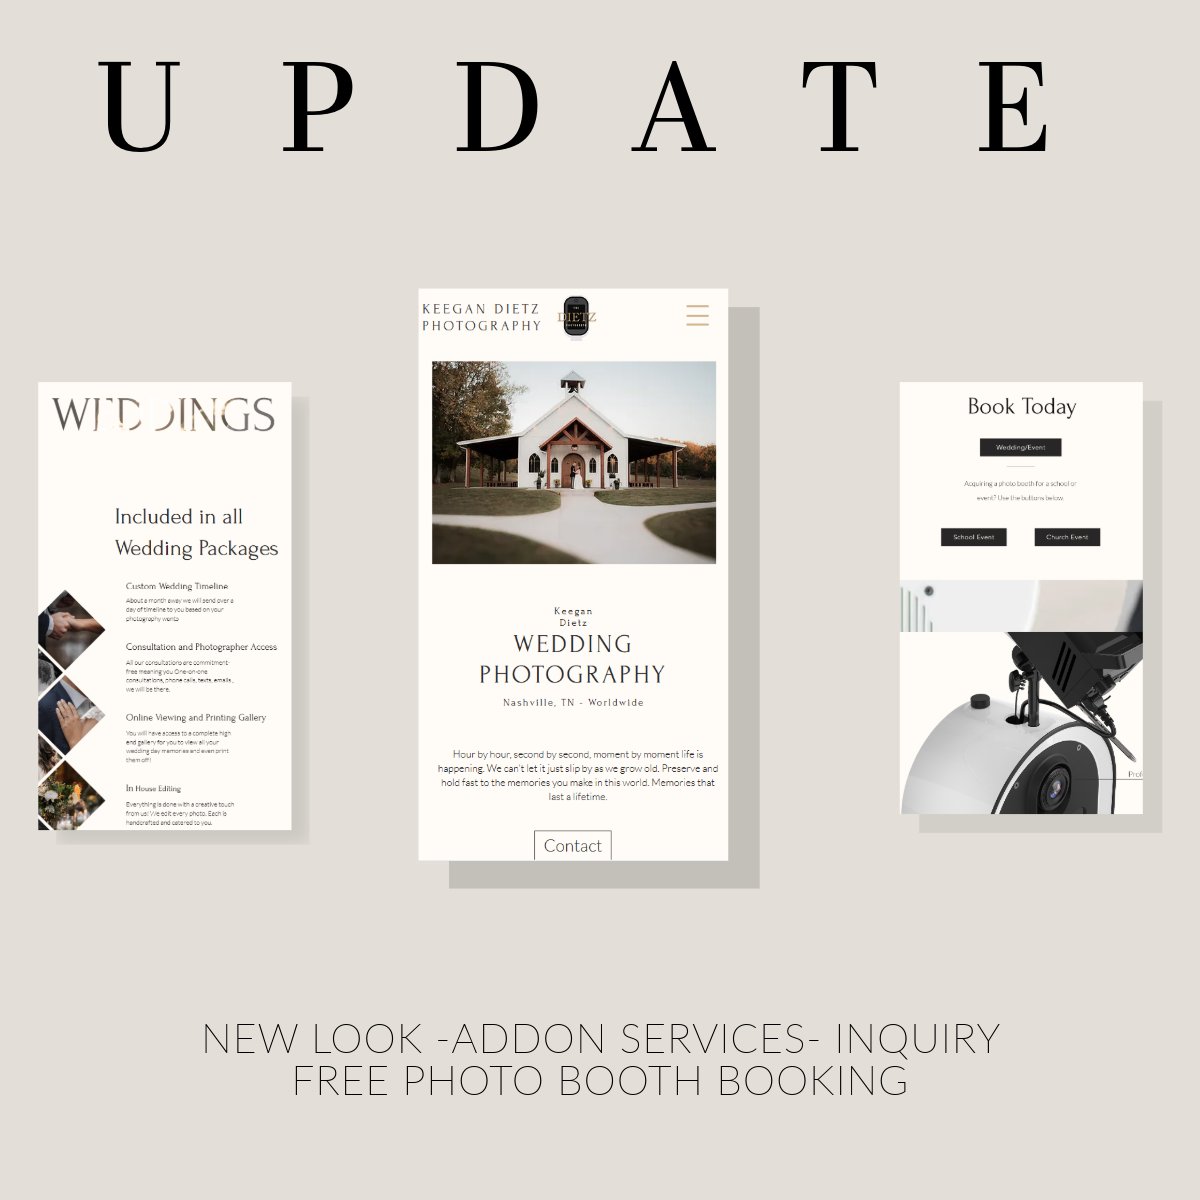 Our website has a new fresh look! With that comes the debut of some new services! My personal favorite is our inquiry-free photo booth booking process. Just fill out the information and select your day! l8r.it/Ur0M